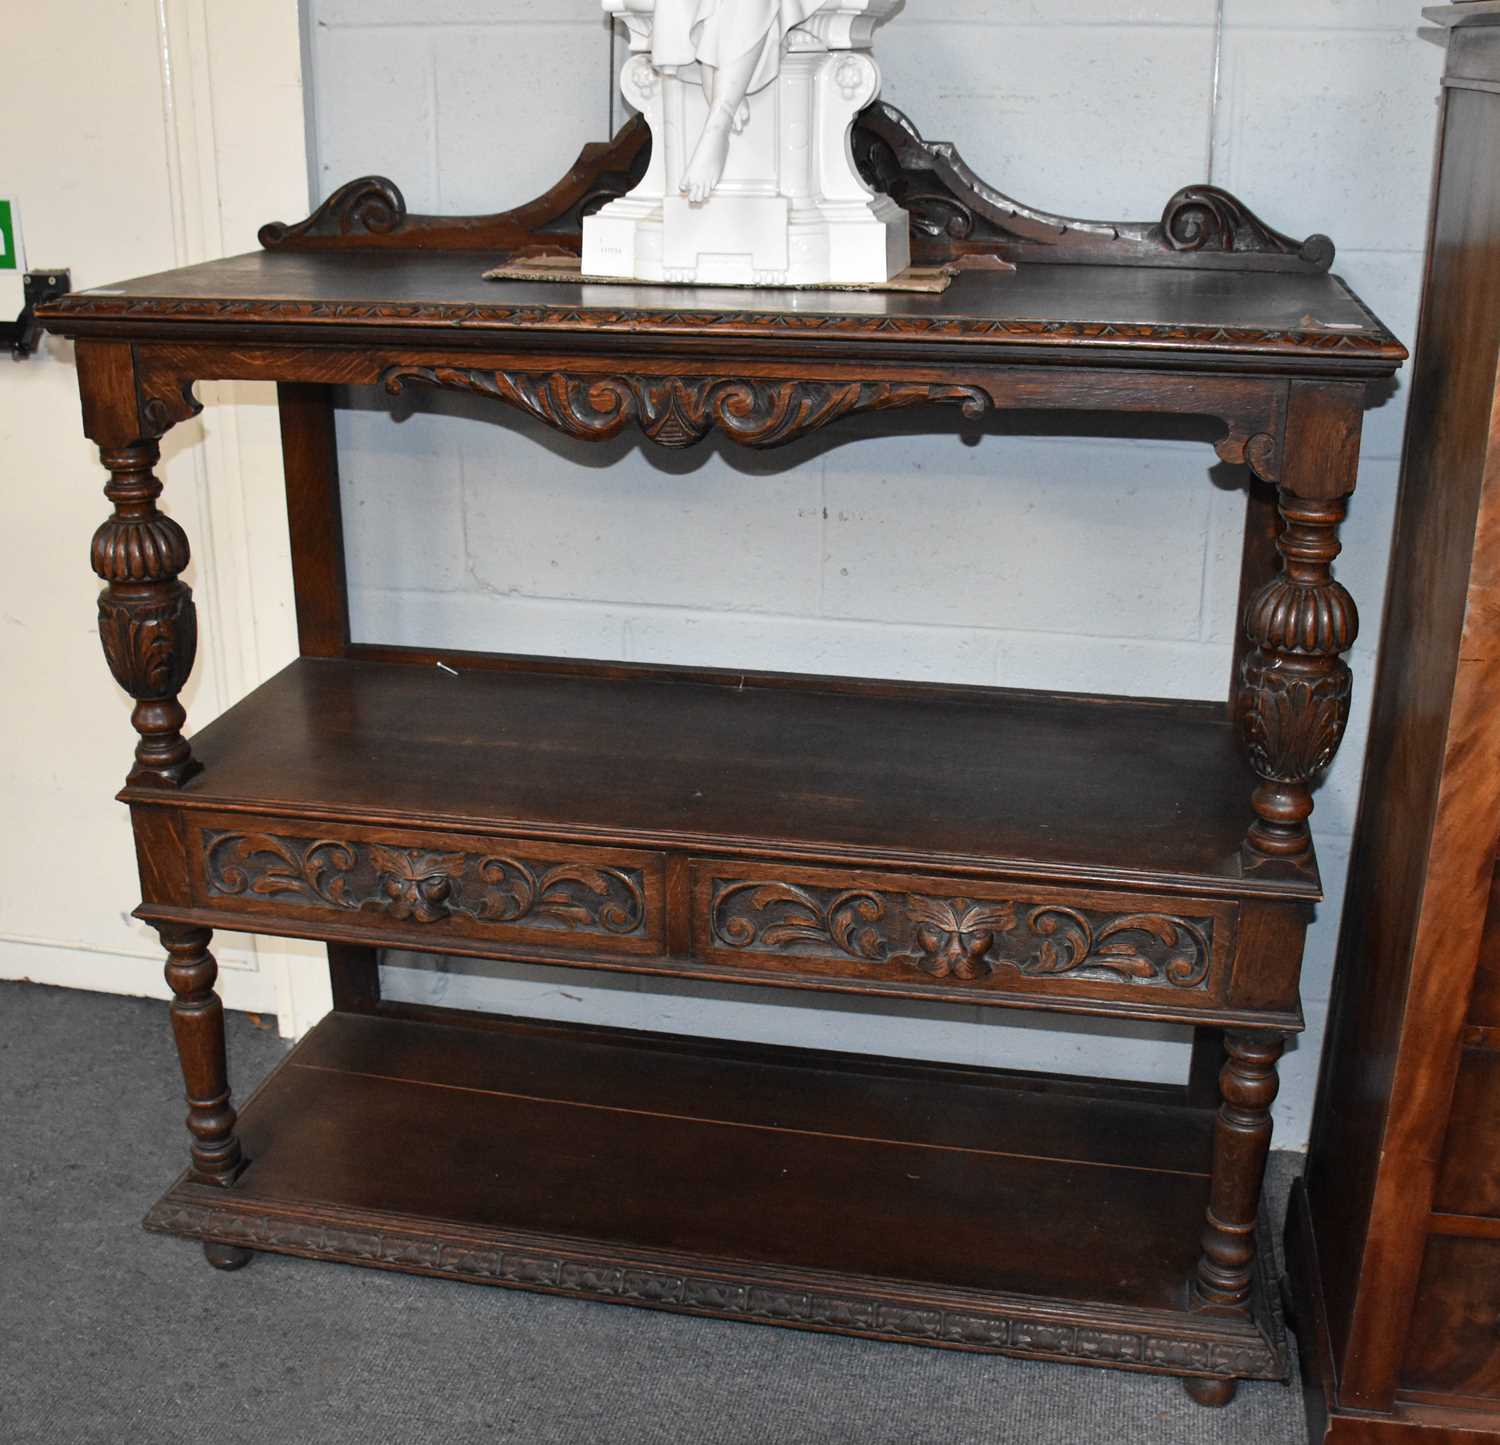 A Victorian Carved Oak Three-Tier Buffet, with scrolling arched pediments, bulbous supports, and